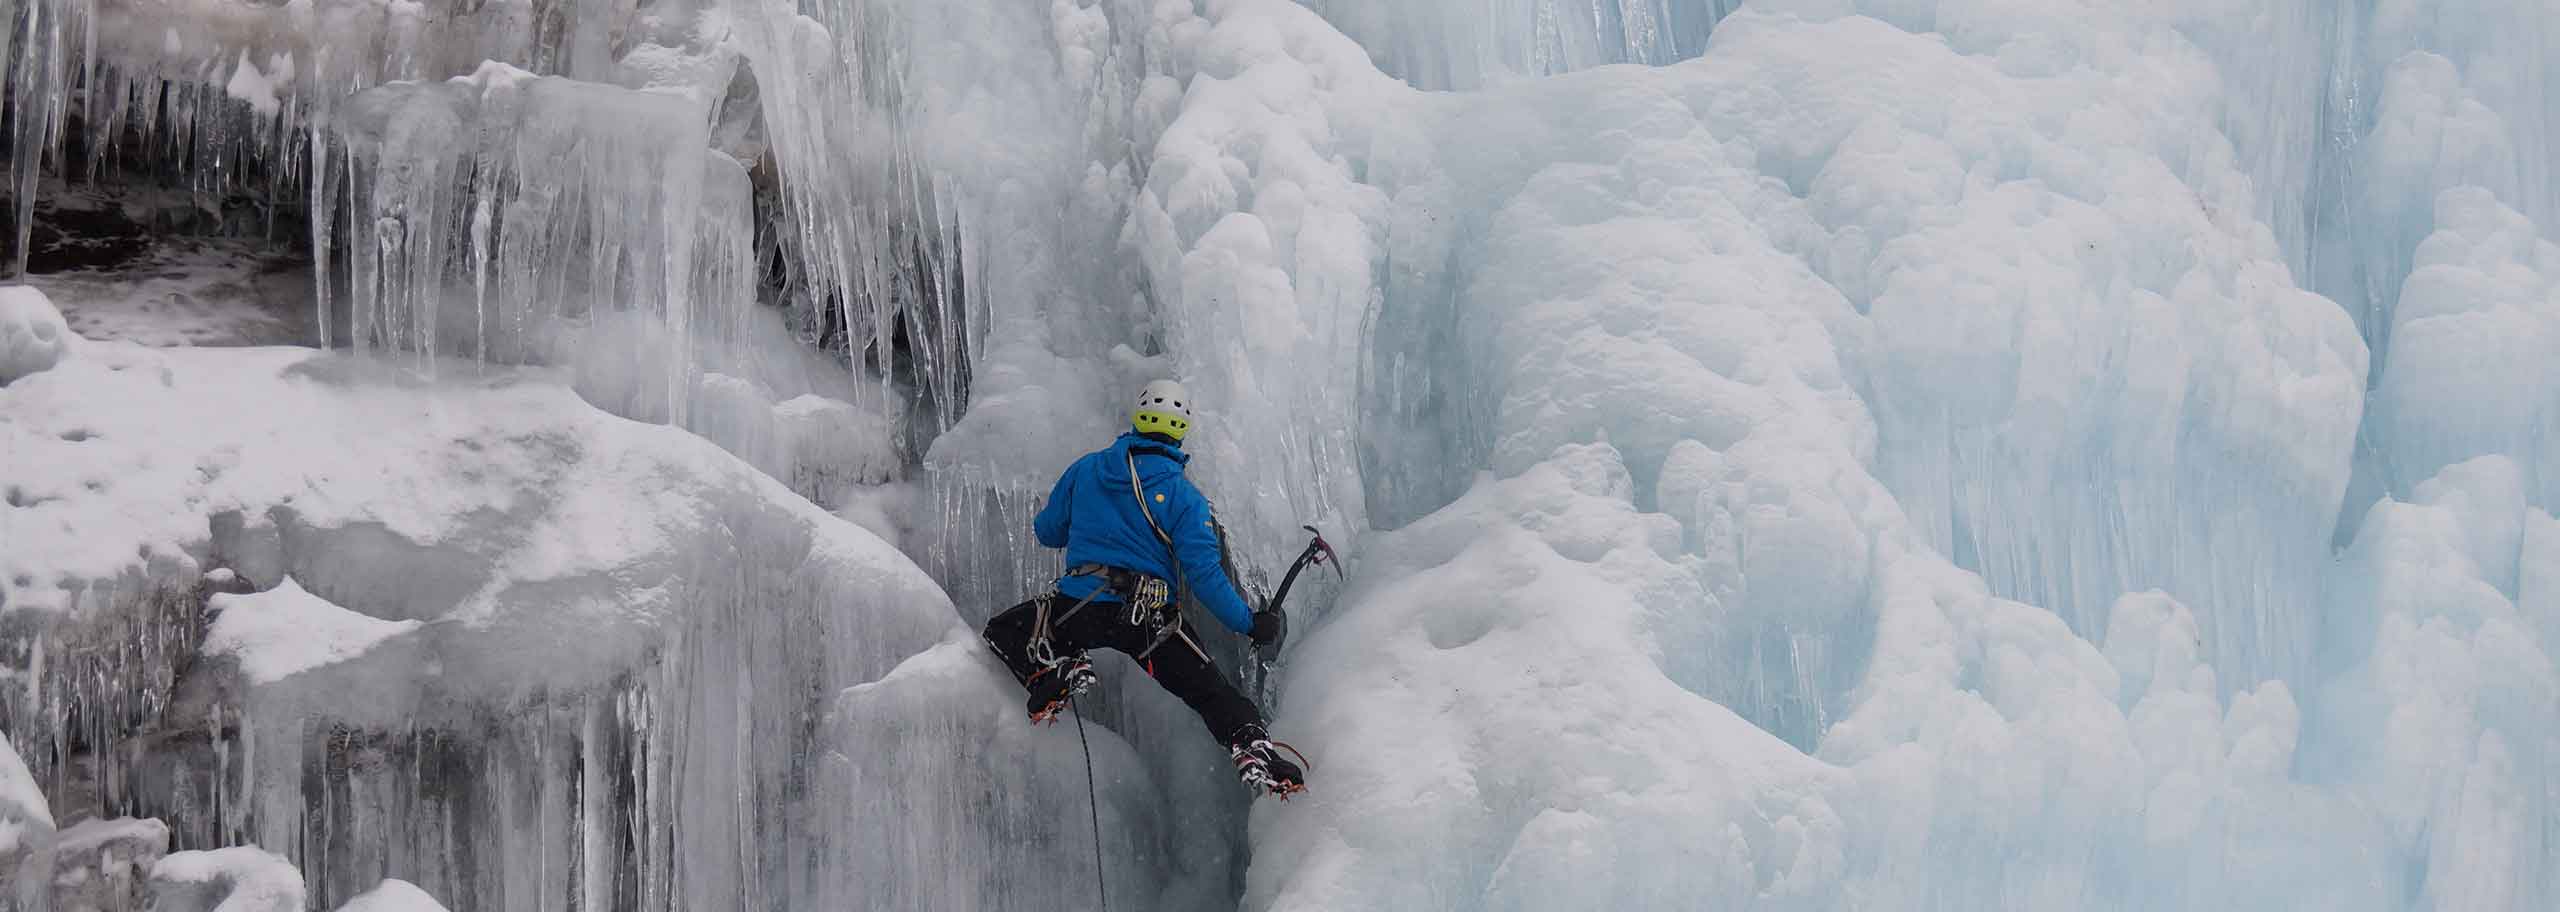 Ice Climbing in Val Gardena, Courses & Multi-pitch Routes